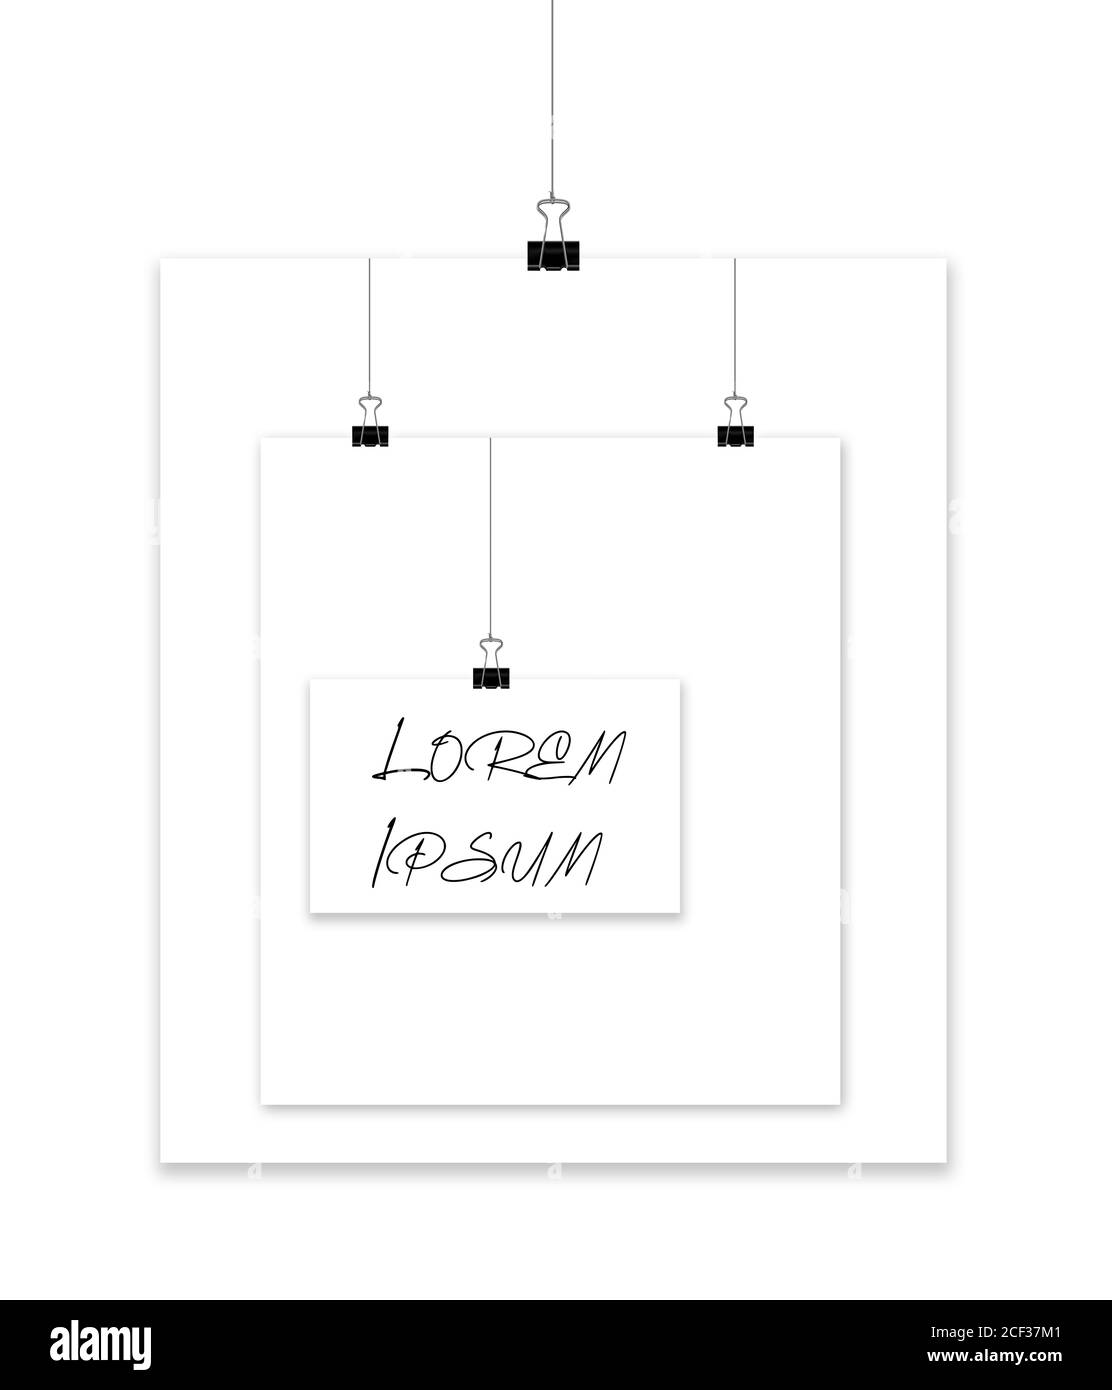 Back steel paper clamps hanging on strings hold white sheets of paper that form a unique frame for copy or art. Lorem Ipsum area available. Stock Photo